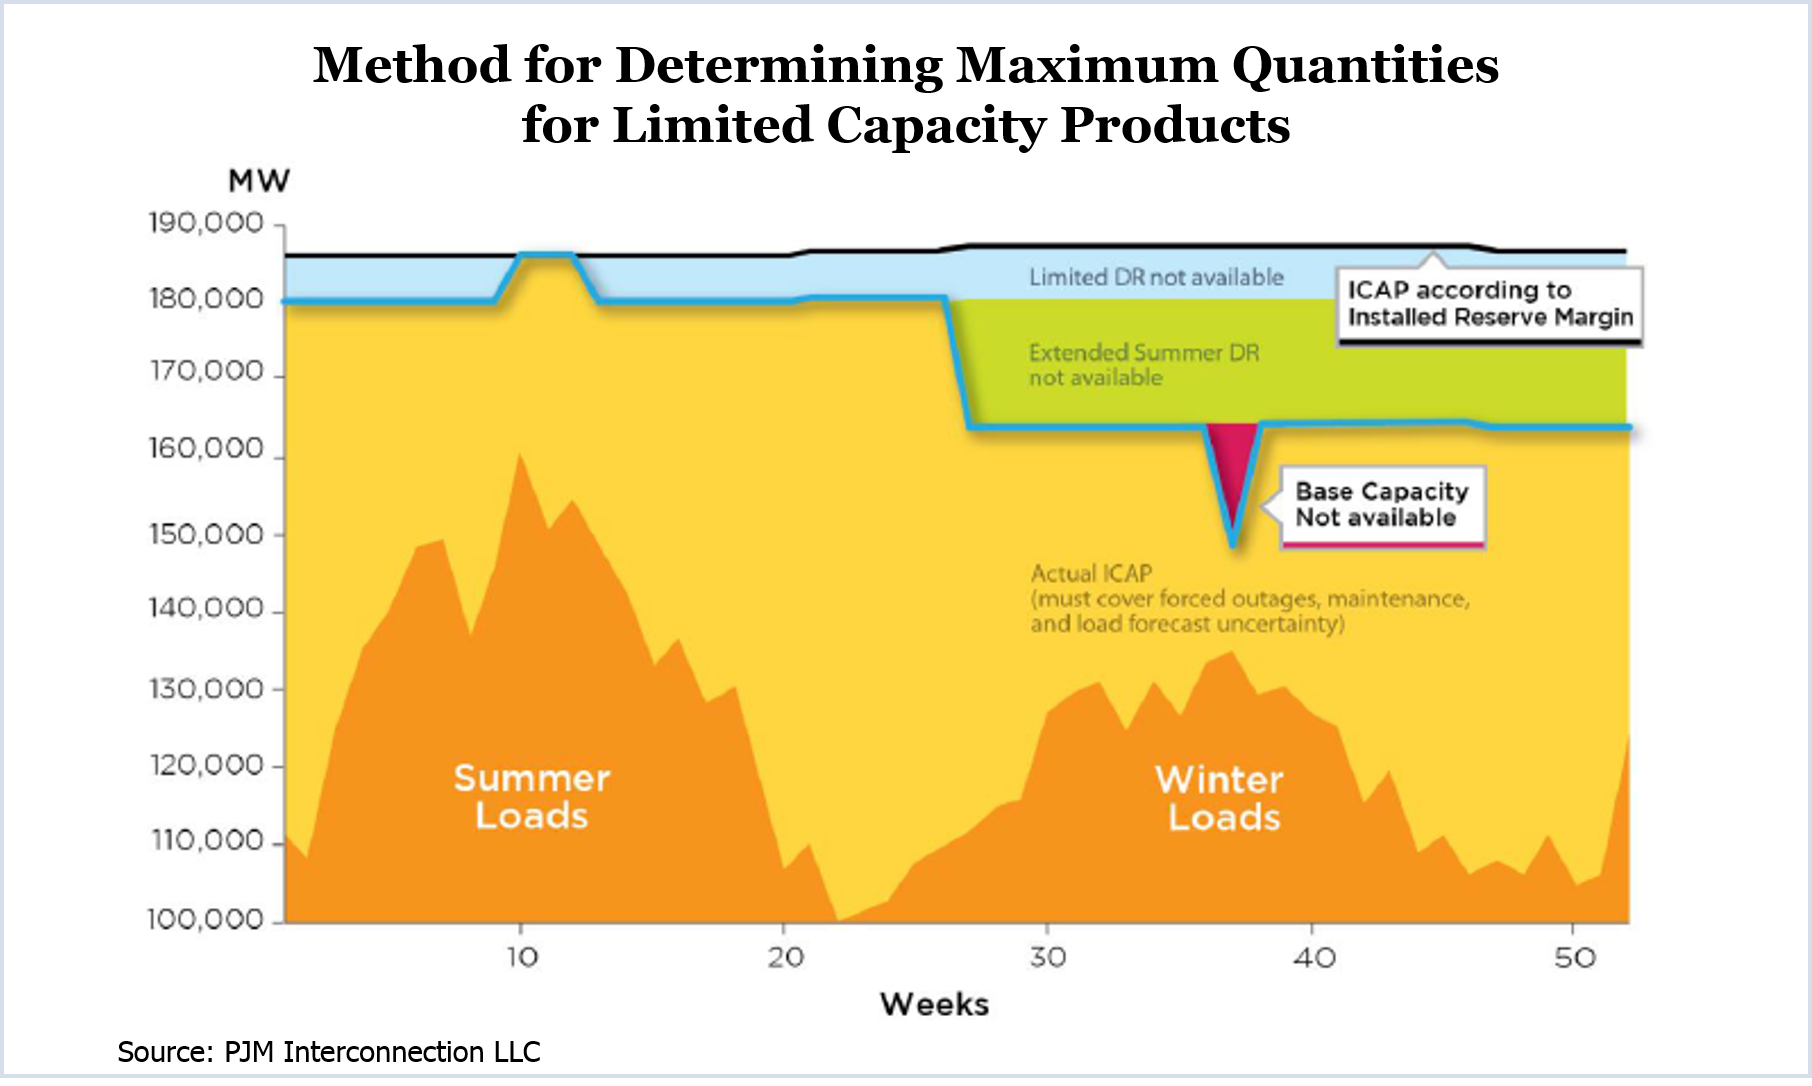 Method for Determining Maximum Quantities for Limited Capacity Products (Source: PJM Interconnection LLC)